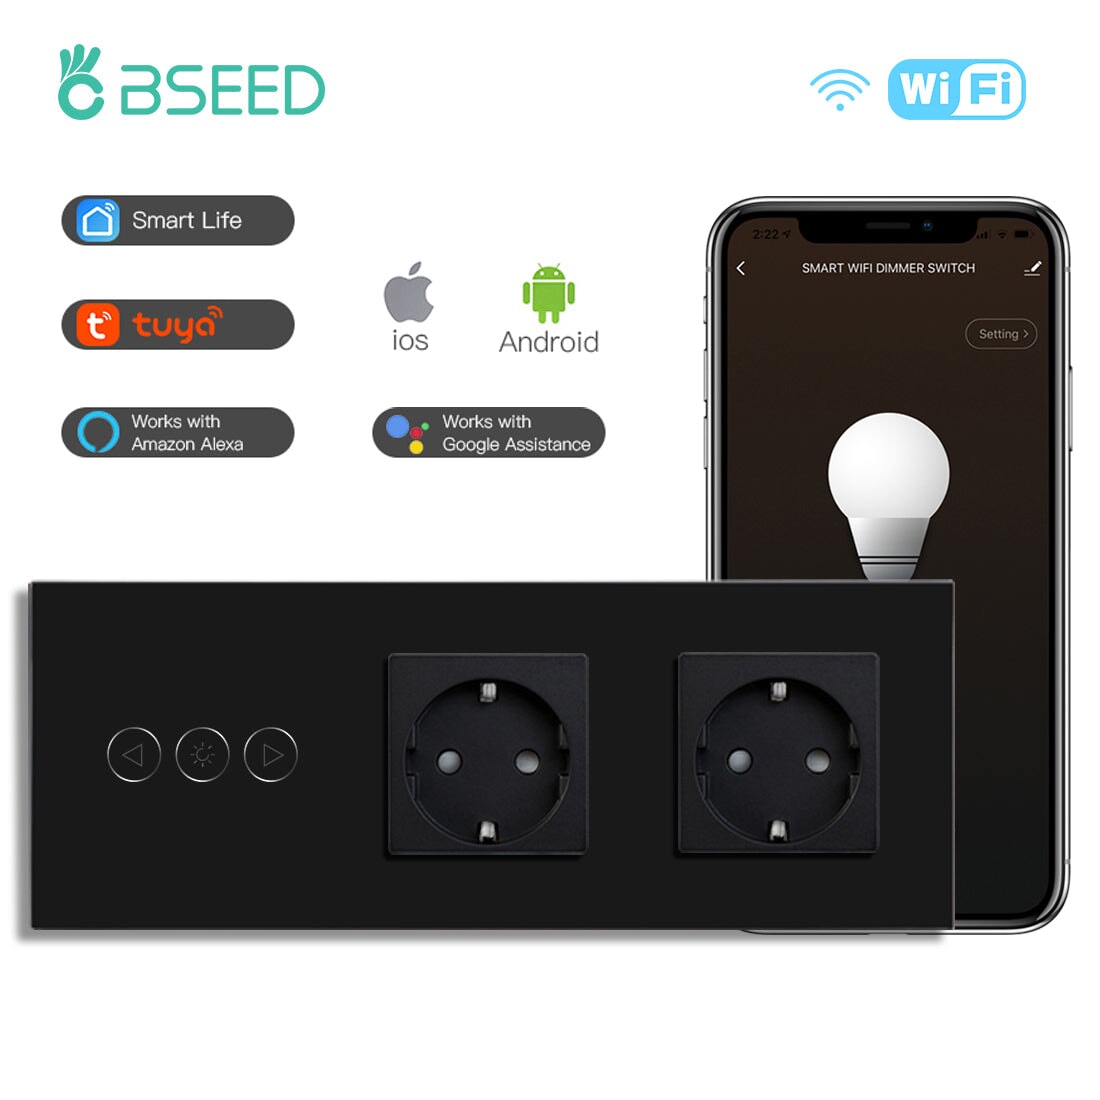 Bseed Smart WiFi Dimmer Switches With Normal EU Standard Wall Sockets 228mm Light Switches Bseedswitch Black 